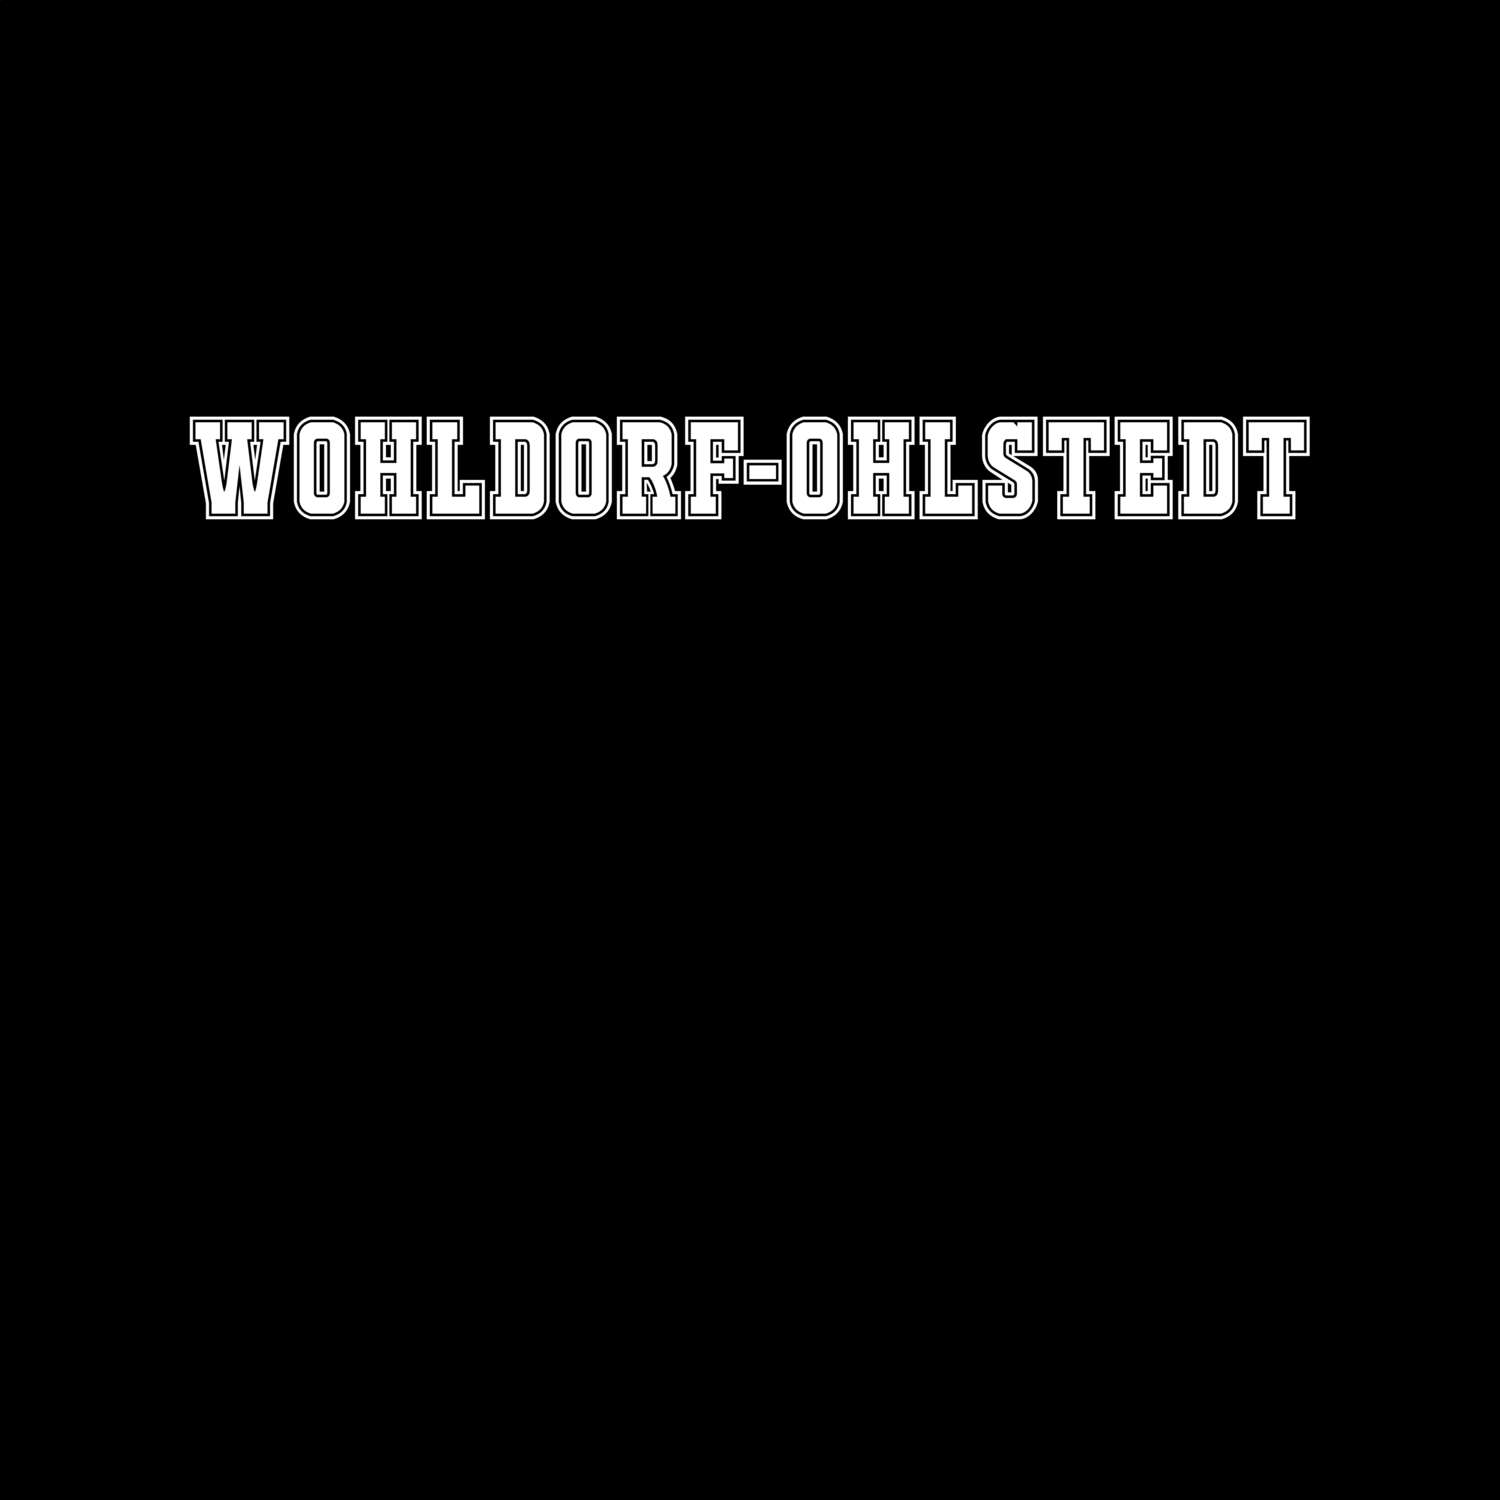 Wohldorf-Ohlstedt T-Shirt »Classic«